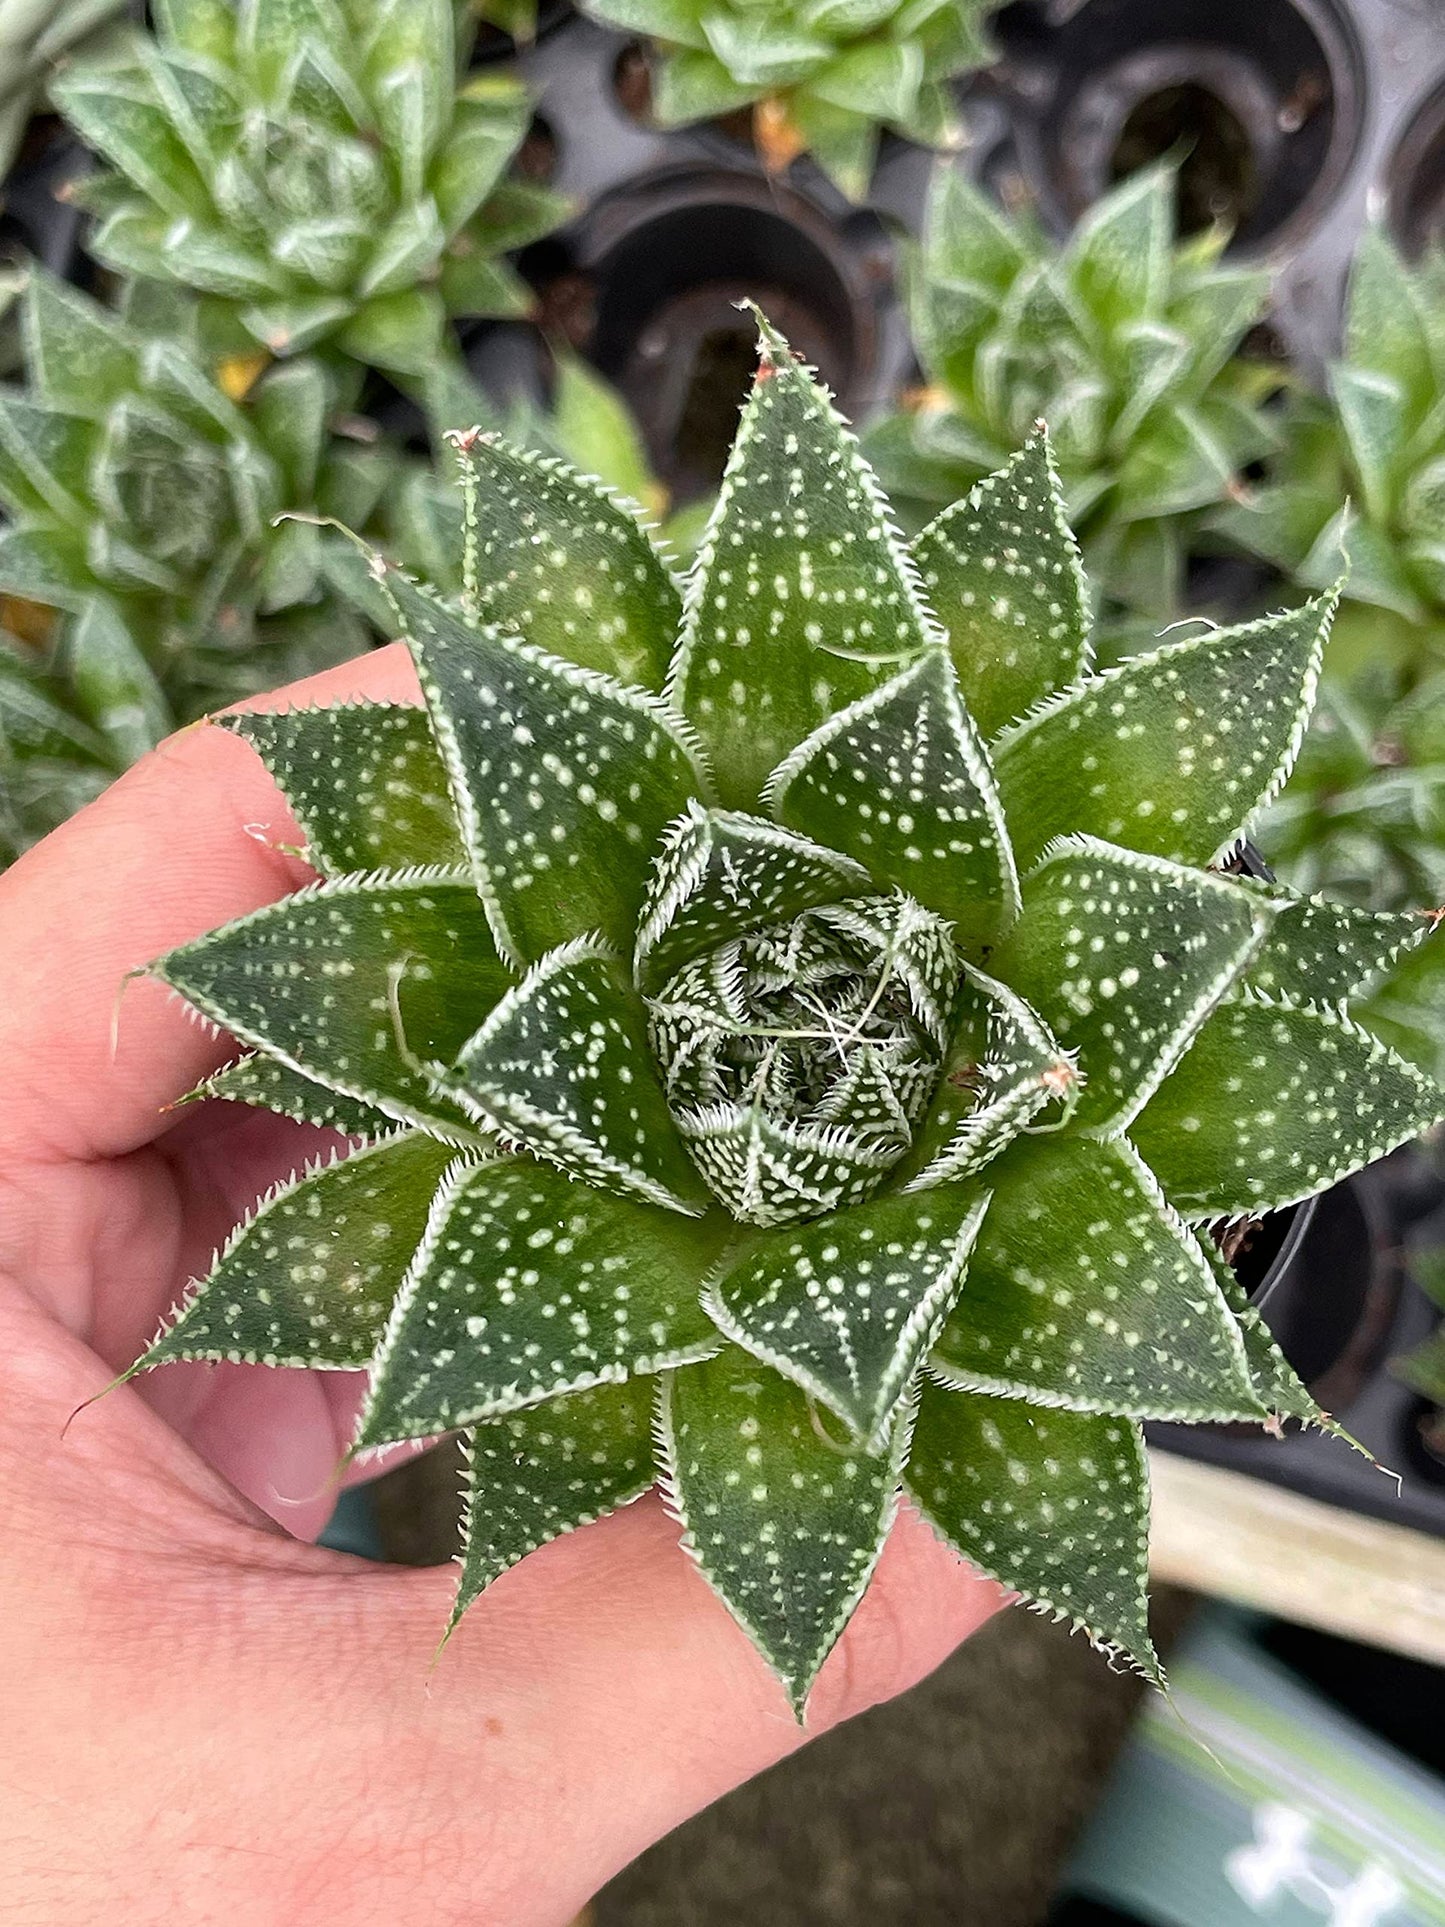 Variegated Aloe, Tiger Aloe, Aloe Variegata, White Spotted, Polka dot lace Aloe Stunning one of a Kind Limited Supply, in 2 inch Pot